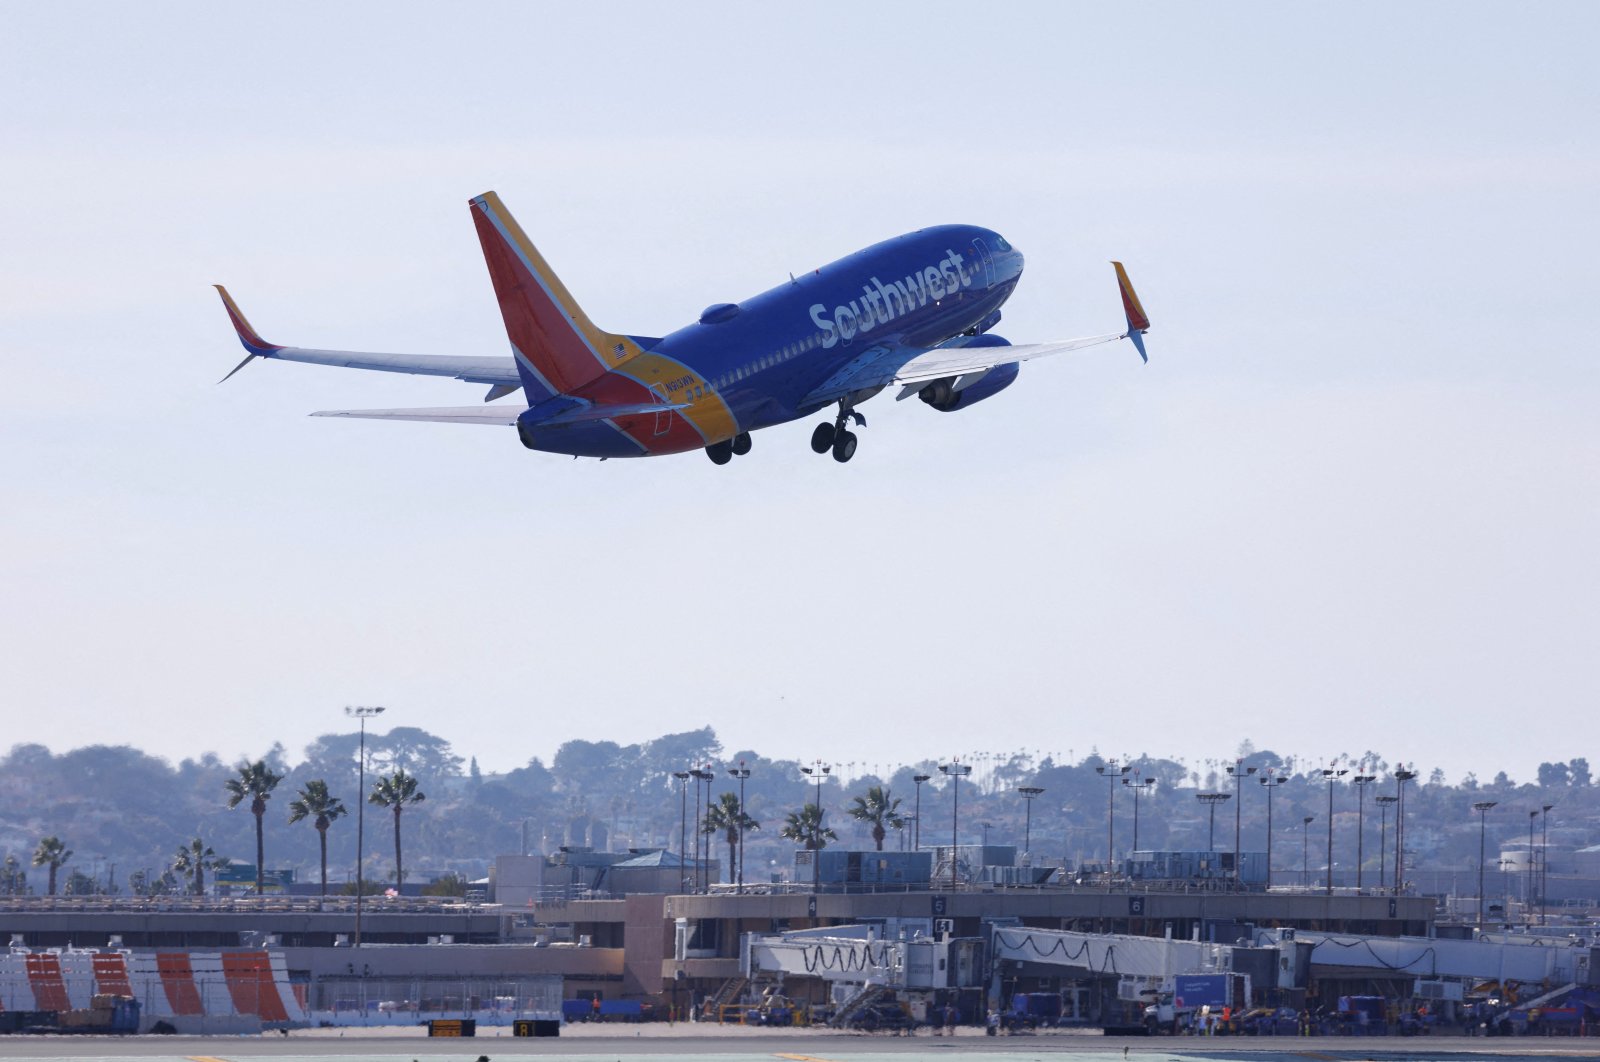 A Southwest Airlines passenger flight takes off from San Diego International Airport in San Diego, California, U.S., Feb. 3, 2023. (Reuters Photo)